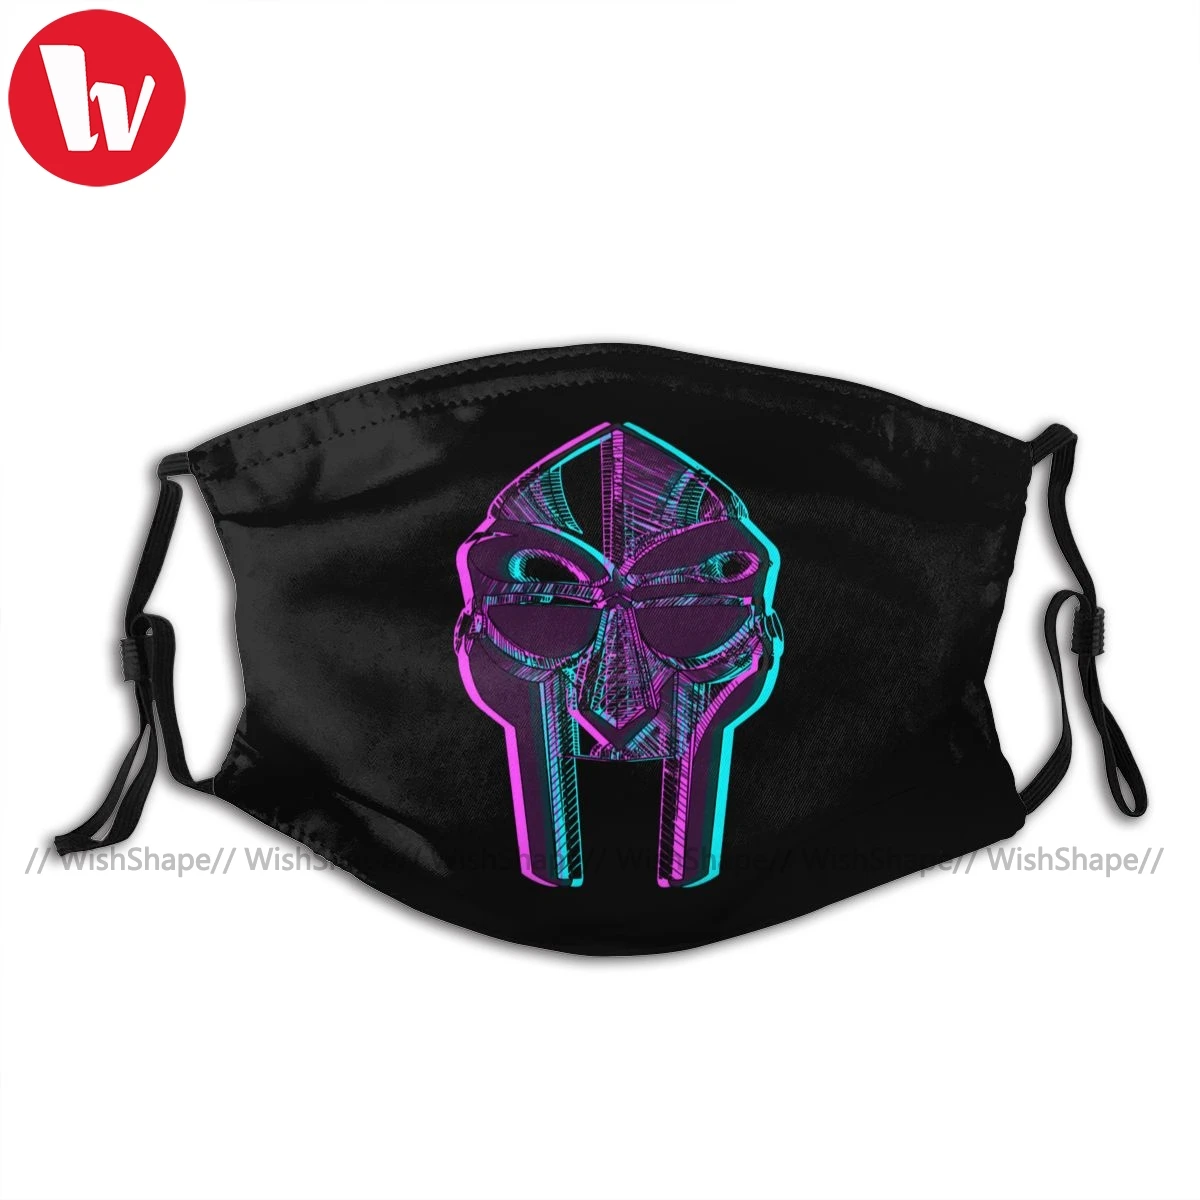 

Mf Doom Mouth Face Mask Mf Doom Facial Mask Funny for Adult Fashion with Filters Mask